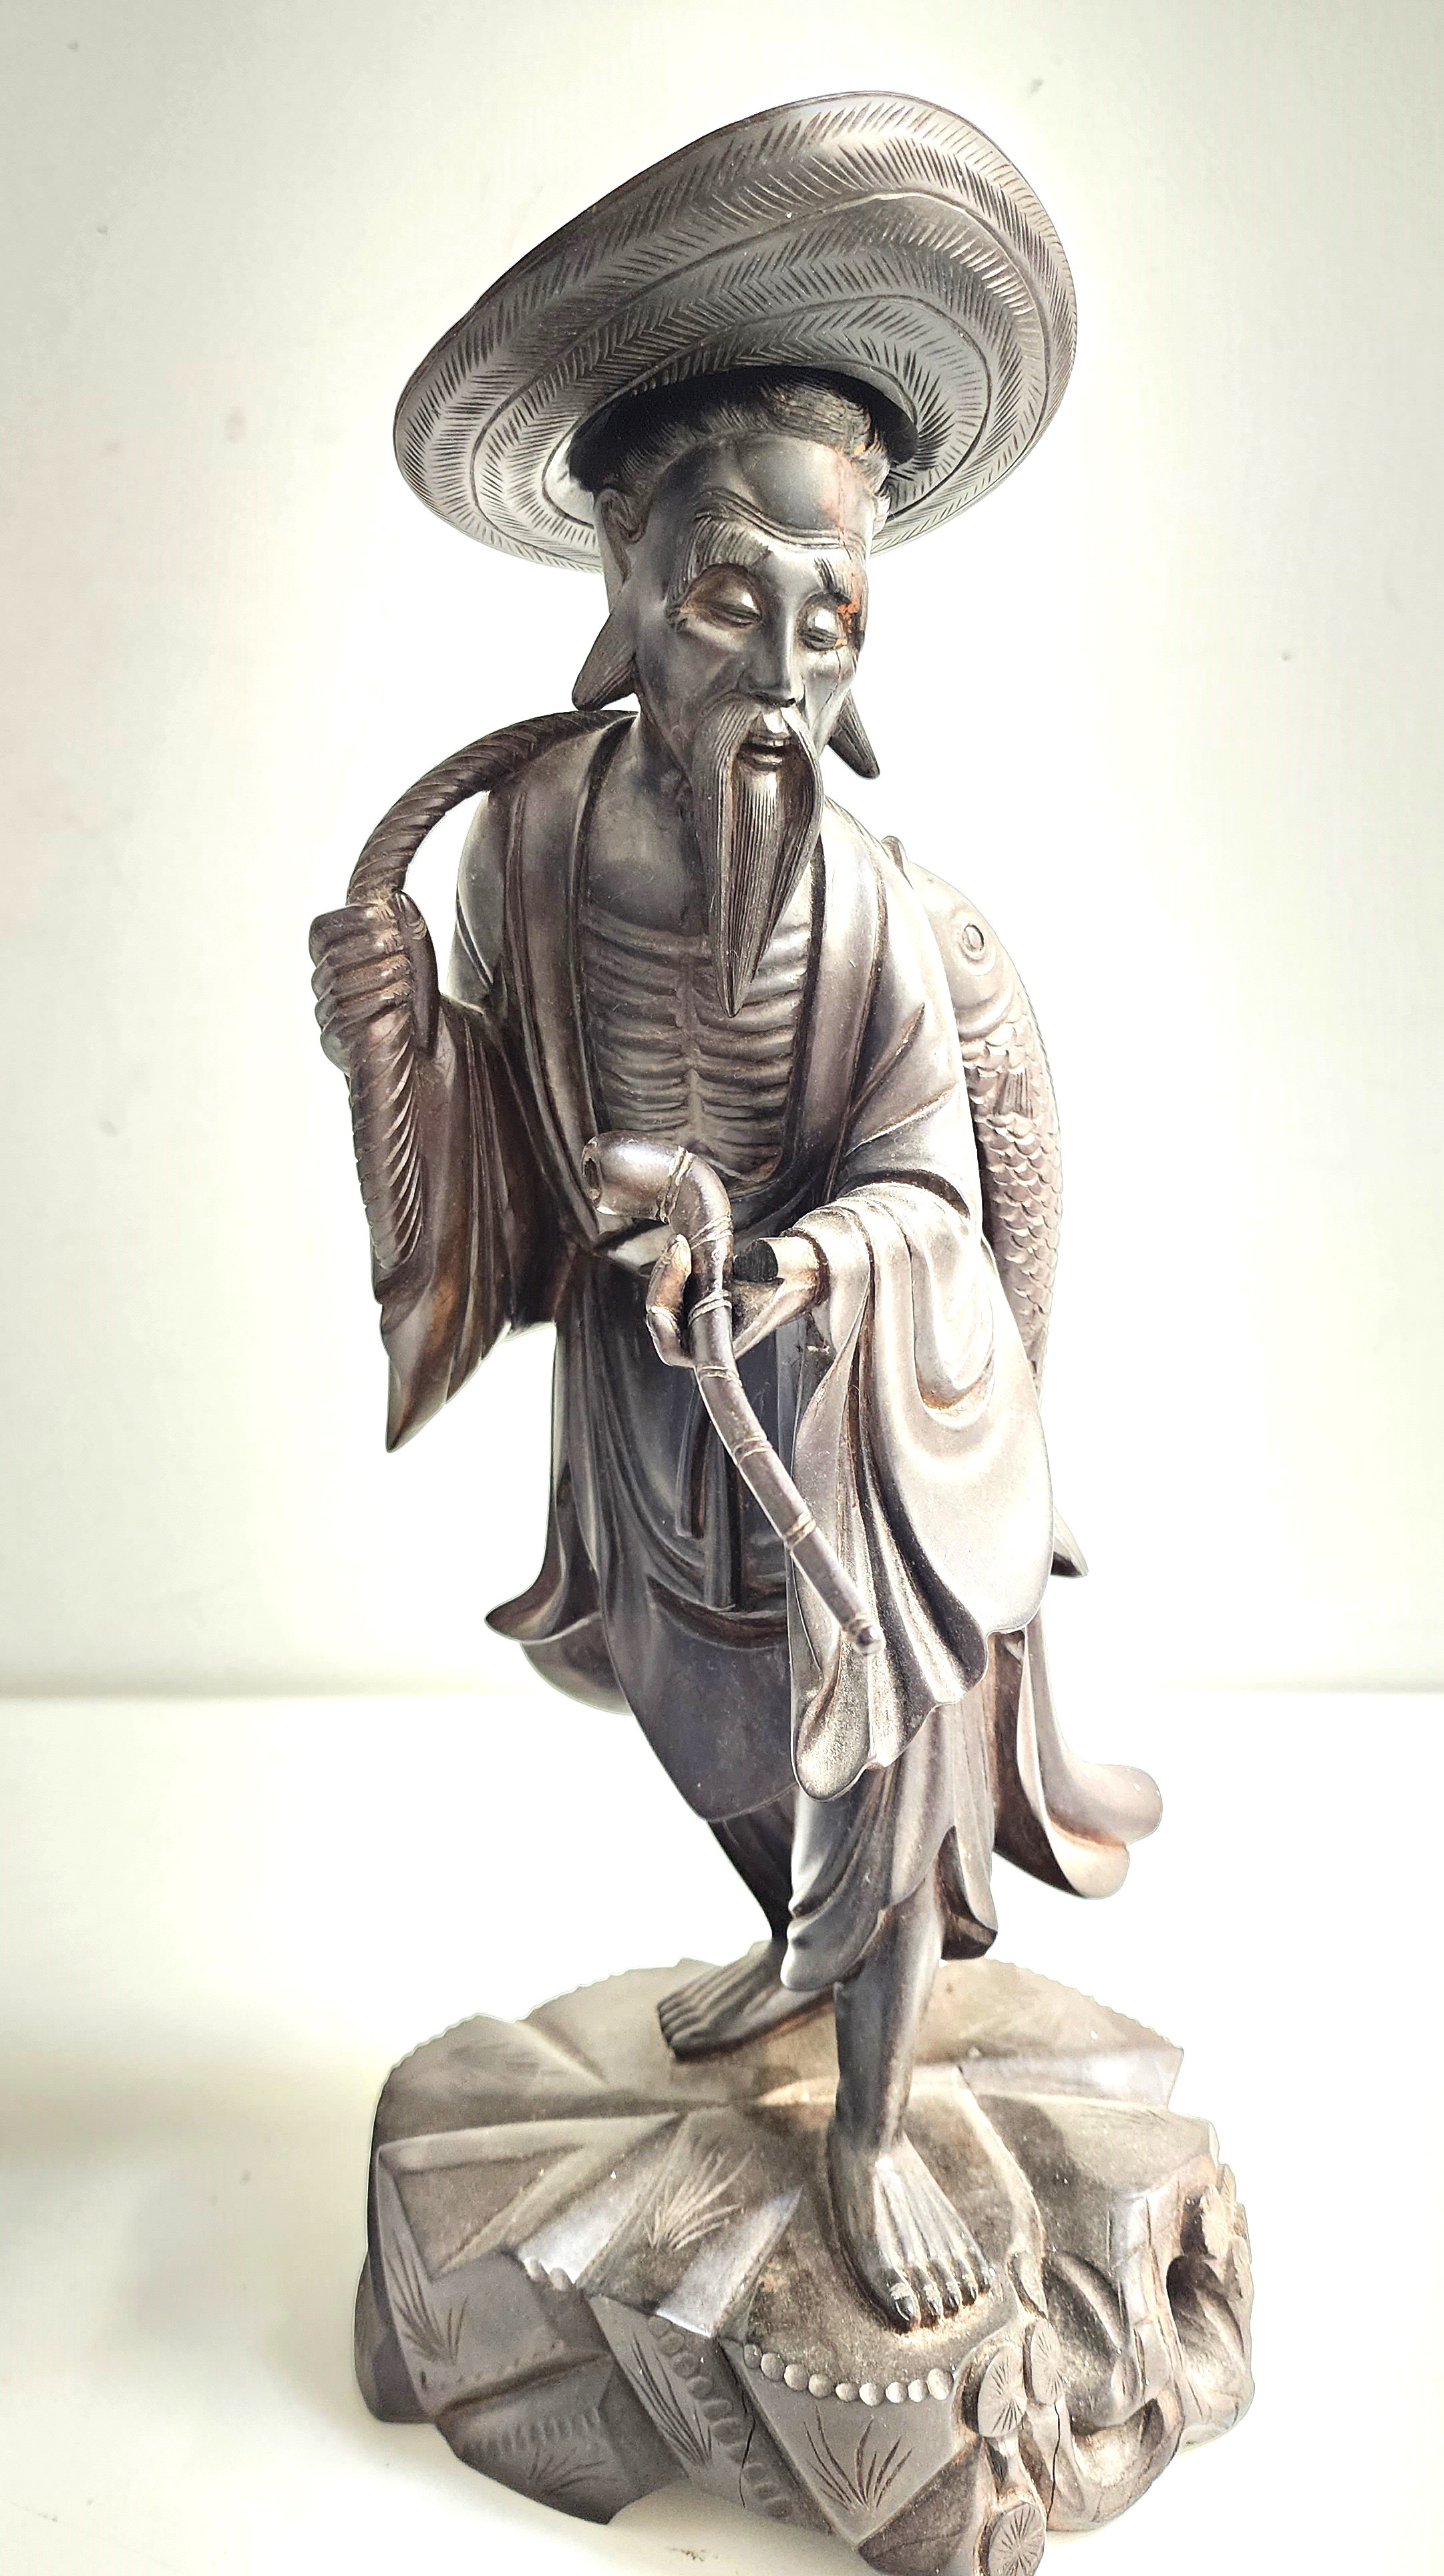 EARLY 20th CENTURY CHINESE CARVED WOOD FIGURE depicting a fisherman with a fish being carried on his